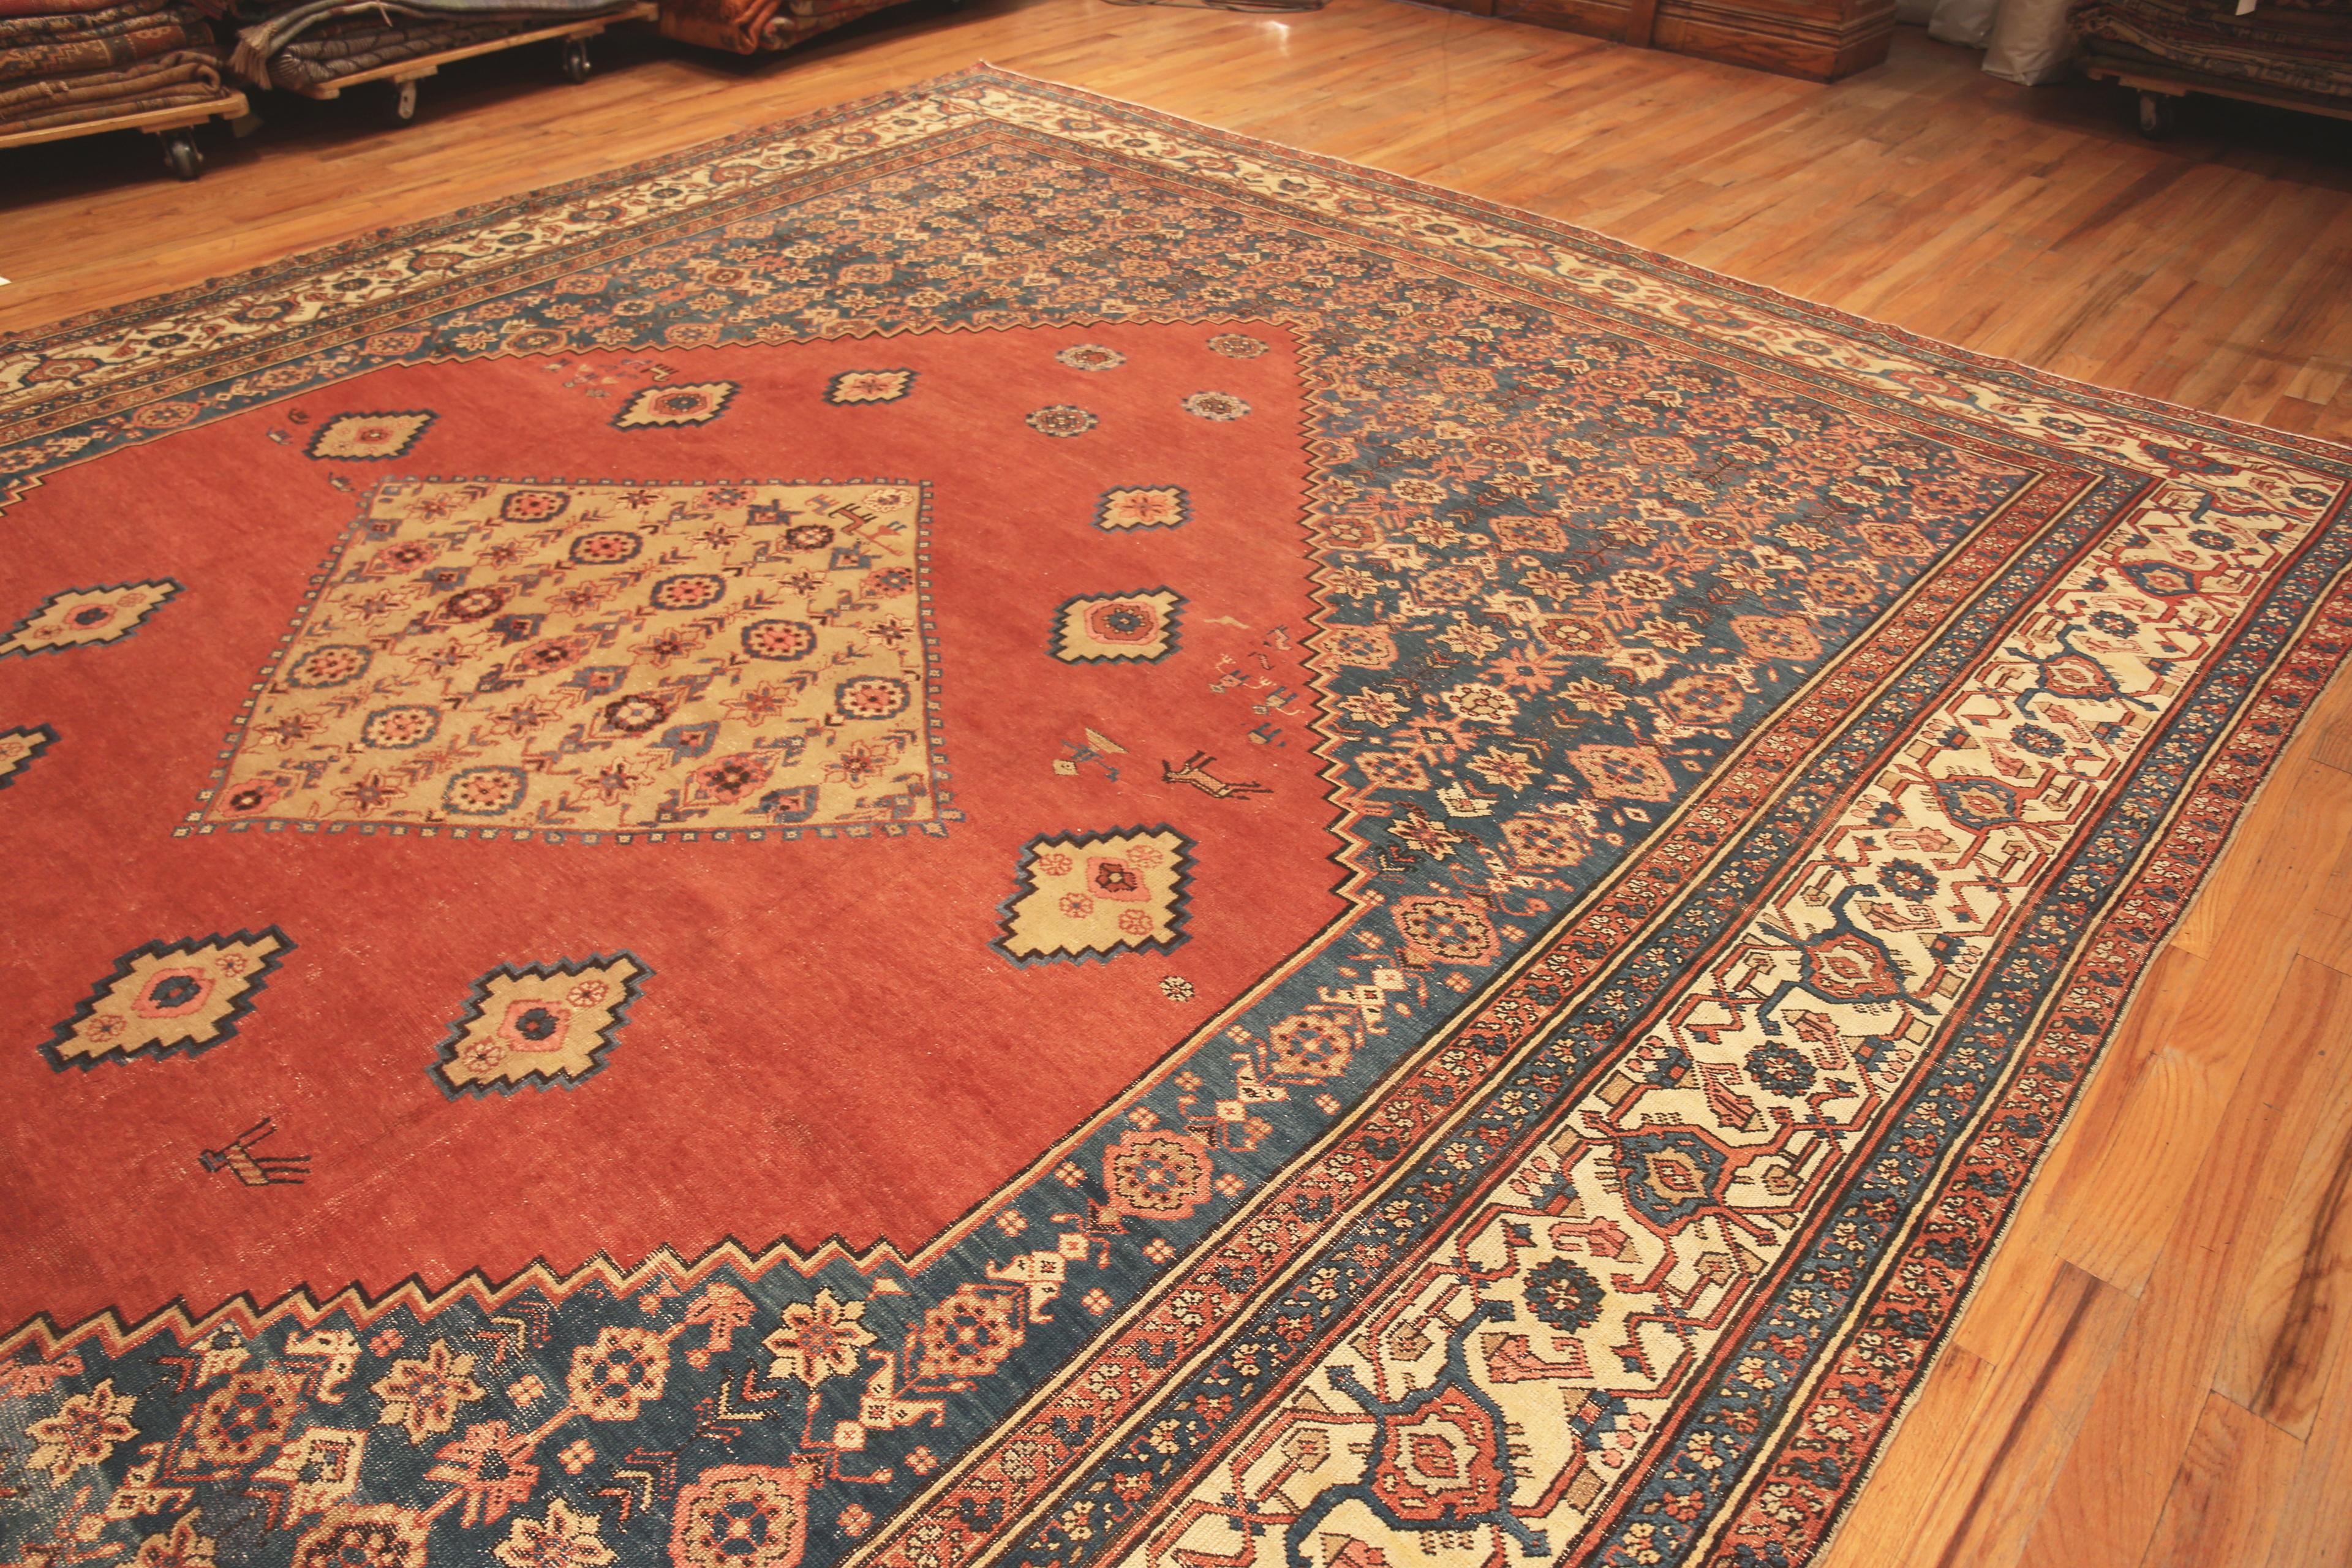 Large Antique Persian Bakshaish Rug, Country of Origin / rug type: Persian rug, Circa date: 1880. Size: 13 ft 7 in x 18 ft (4.14 m x 5.49 m)


